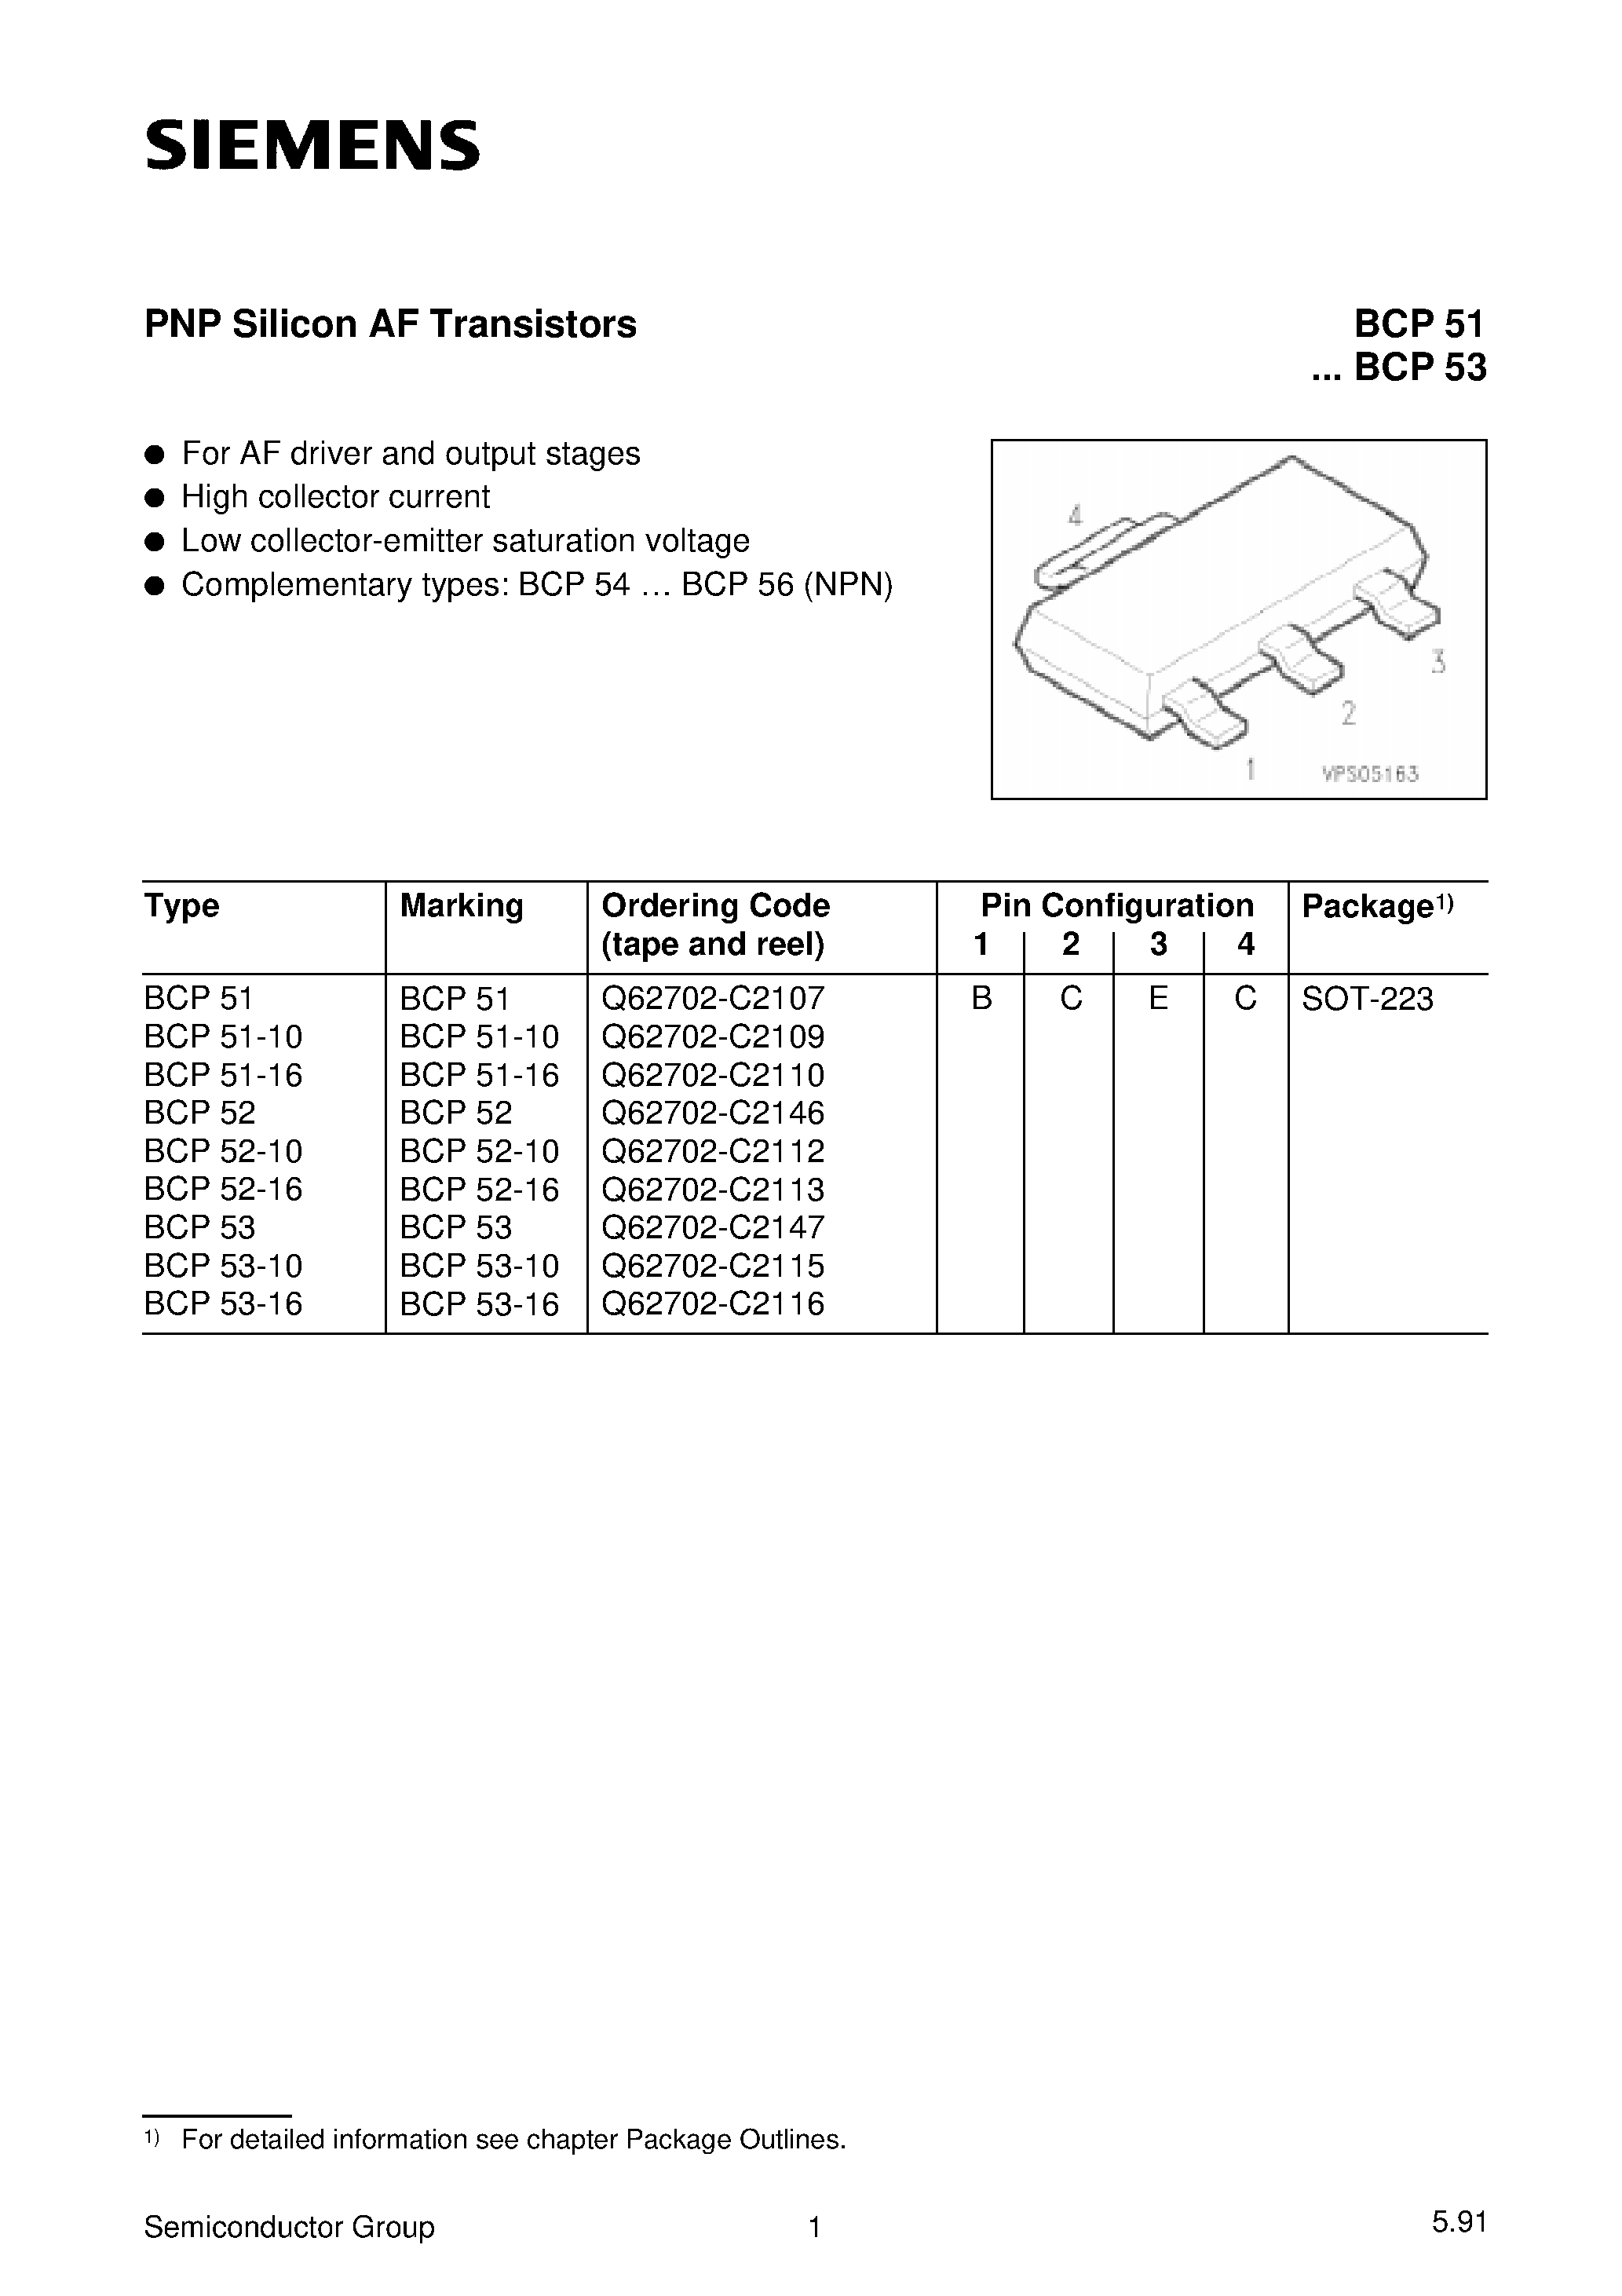 Datasheet BCP51-16 - PNP Silicon AF Transistors (For AF driver and output stages High collector current) page 1